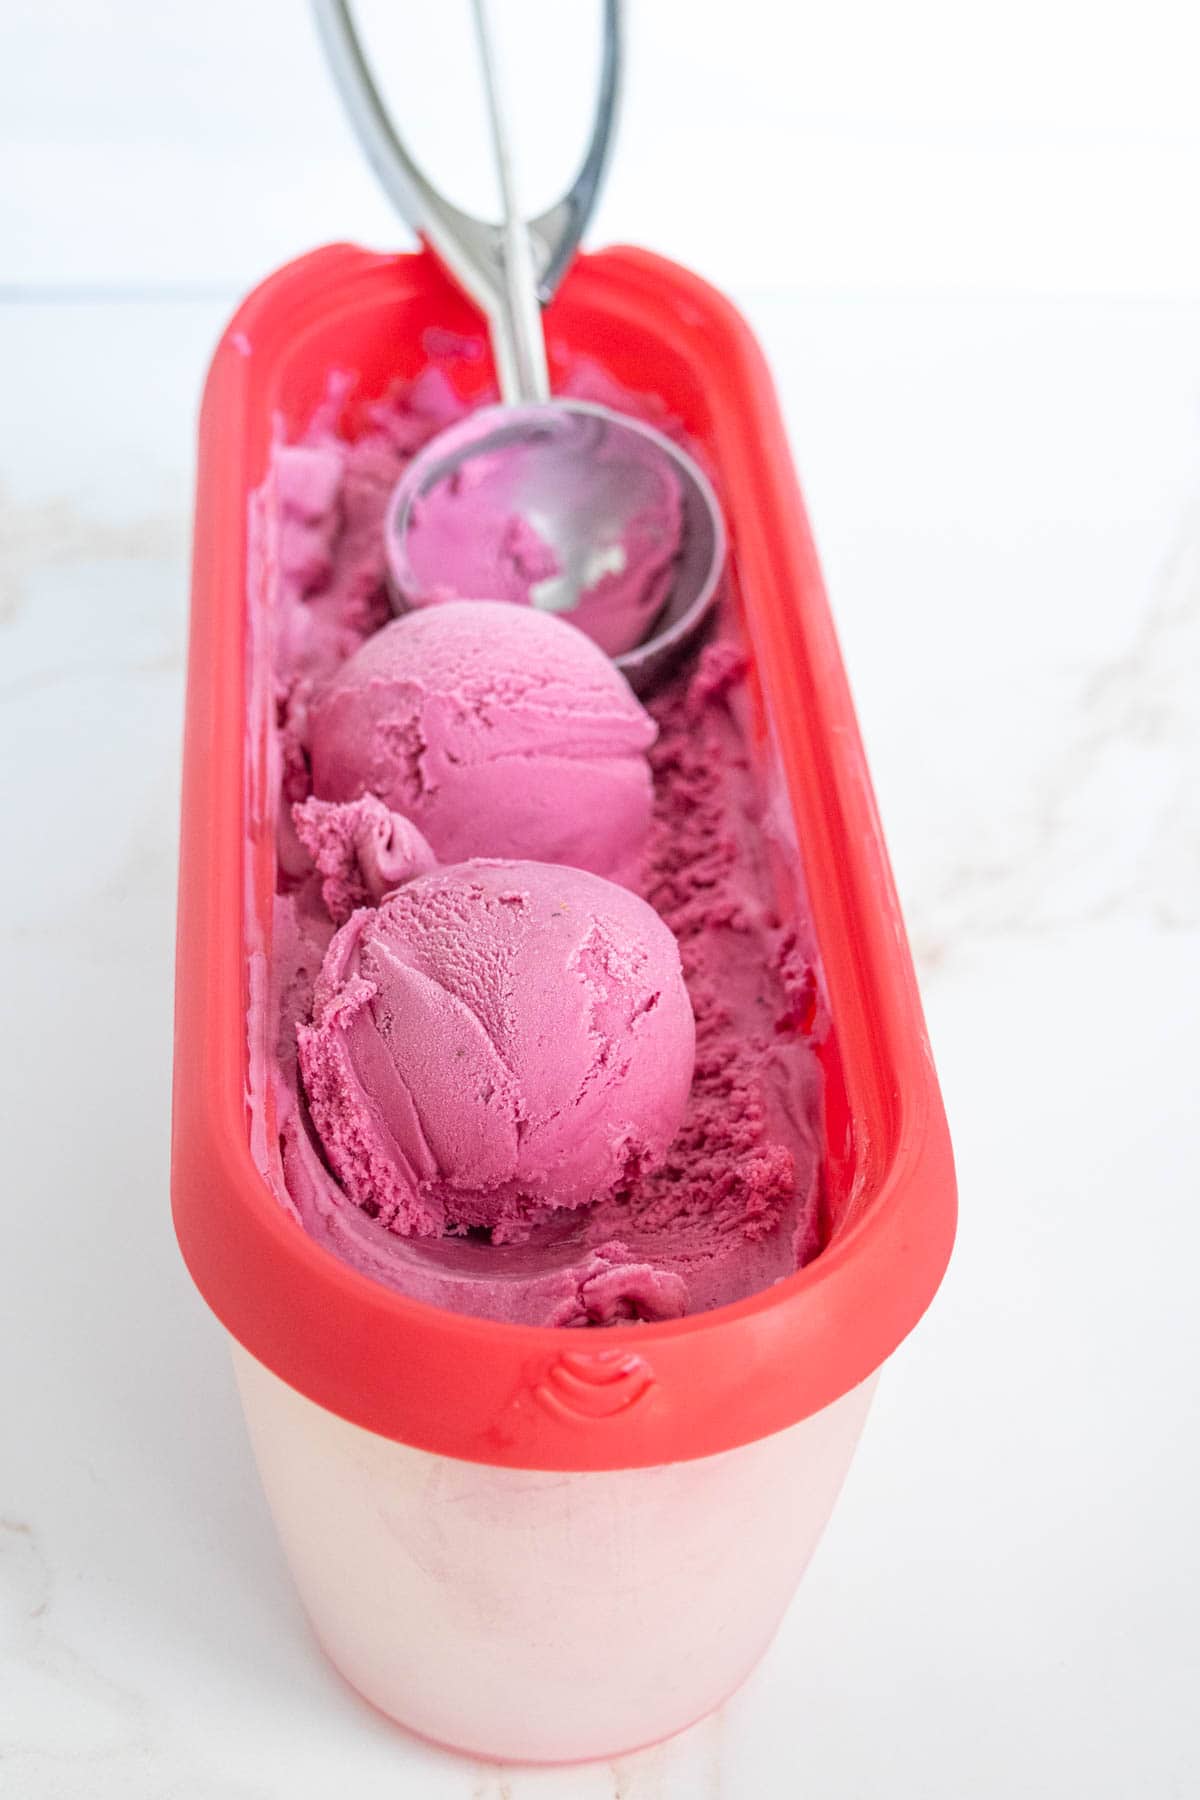 A container of pink ice cream with two scoops on top and an ice cream scoop resting inside.